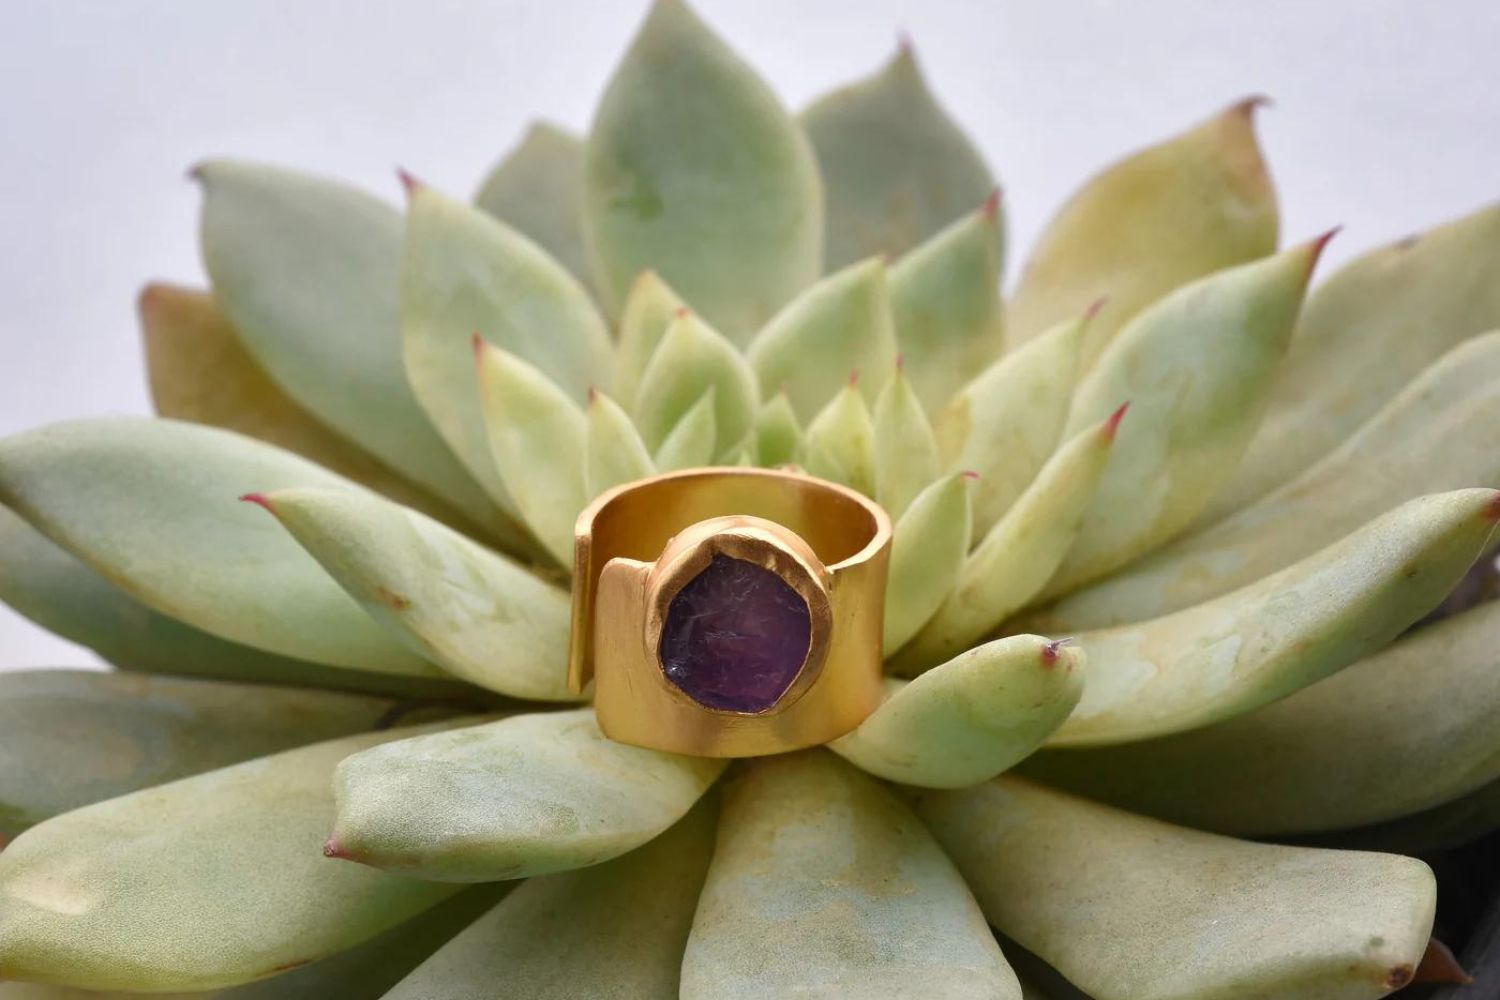 Amethyst - For the love of purple!